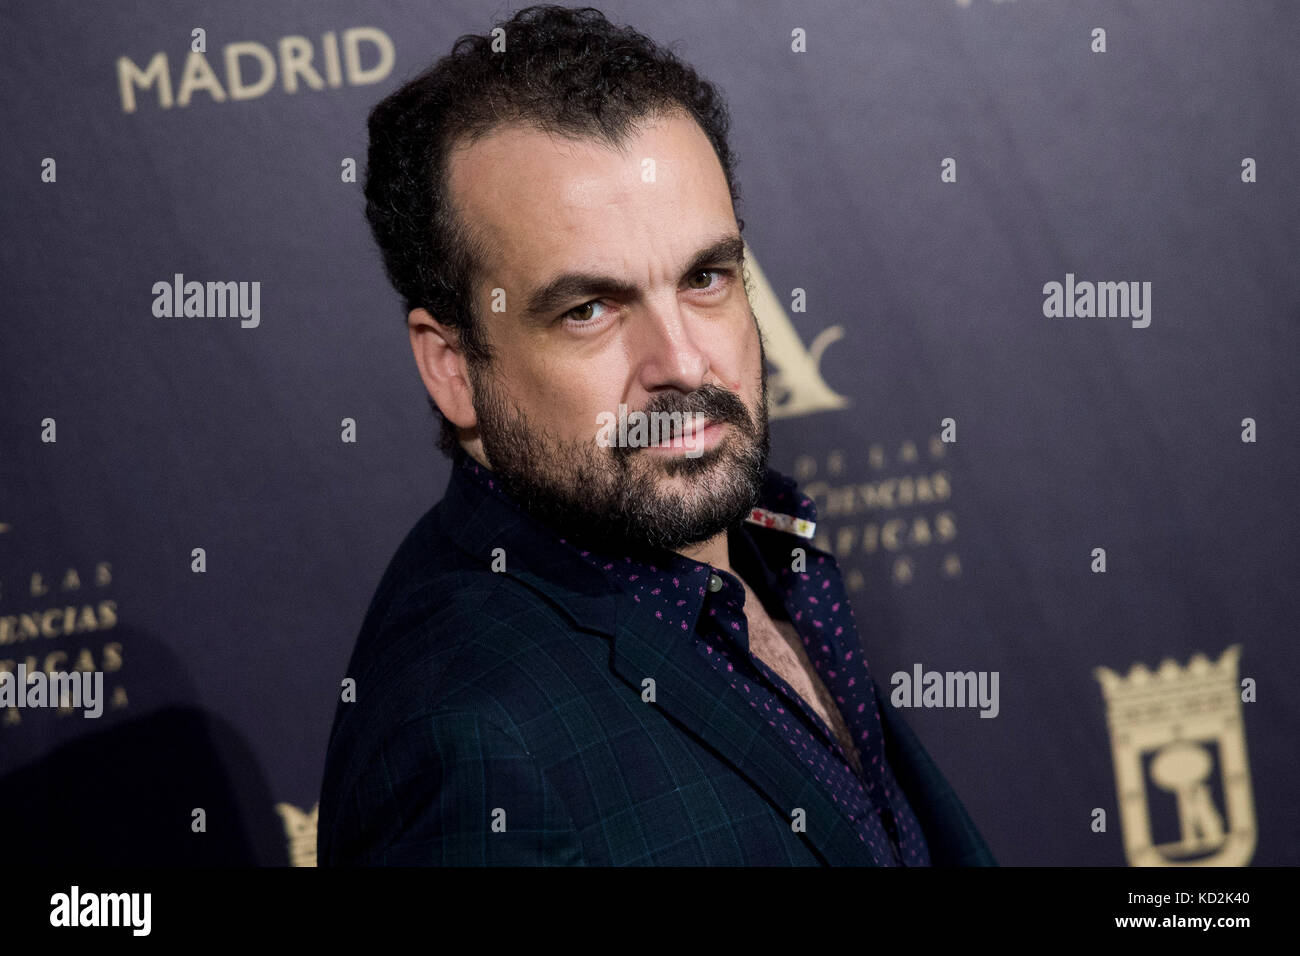 Madrid, Spain. 09th Oct, 2017. Director Nacho Vigalondo during the cocktail of the academies of cinema of Hollywood and Spain in Madrid on Monday 09 October 2017. Credit: Gtres Información más Comuniación on line, S.L./Alamy Live News Stock Photo